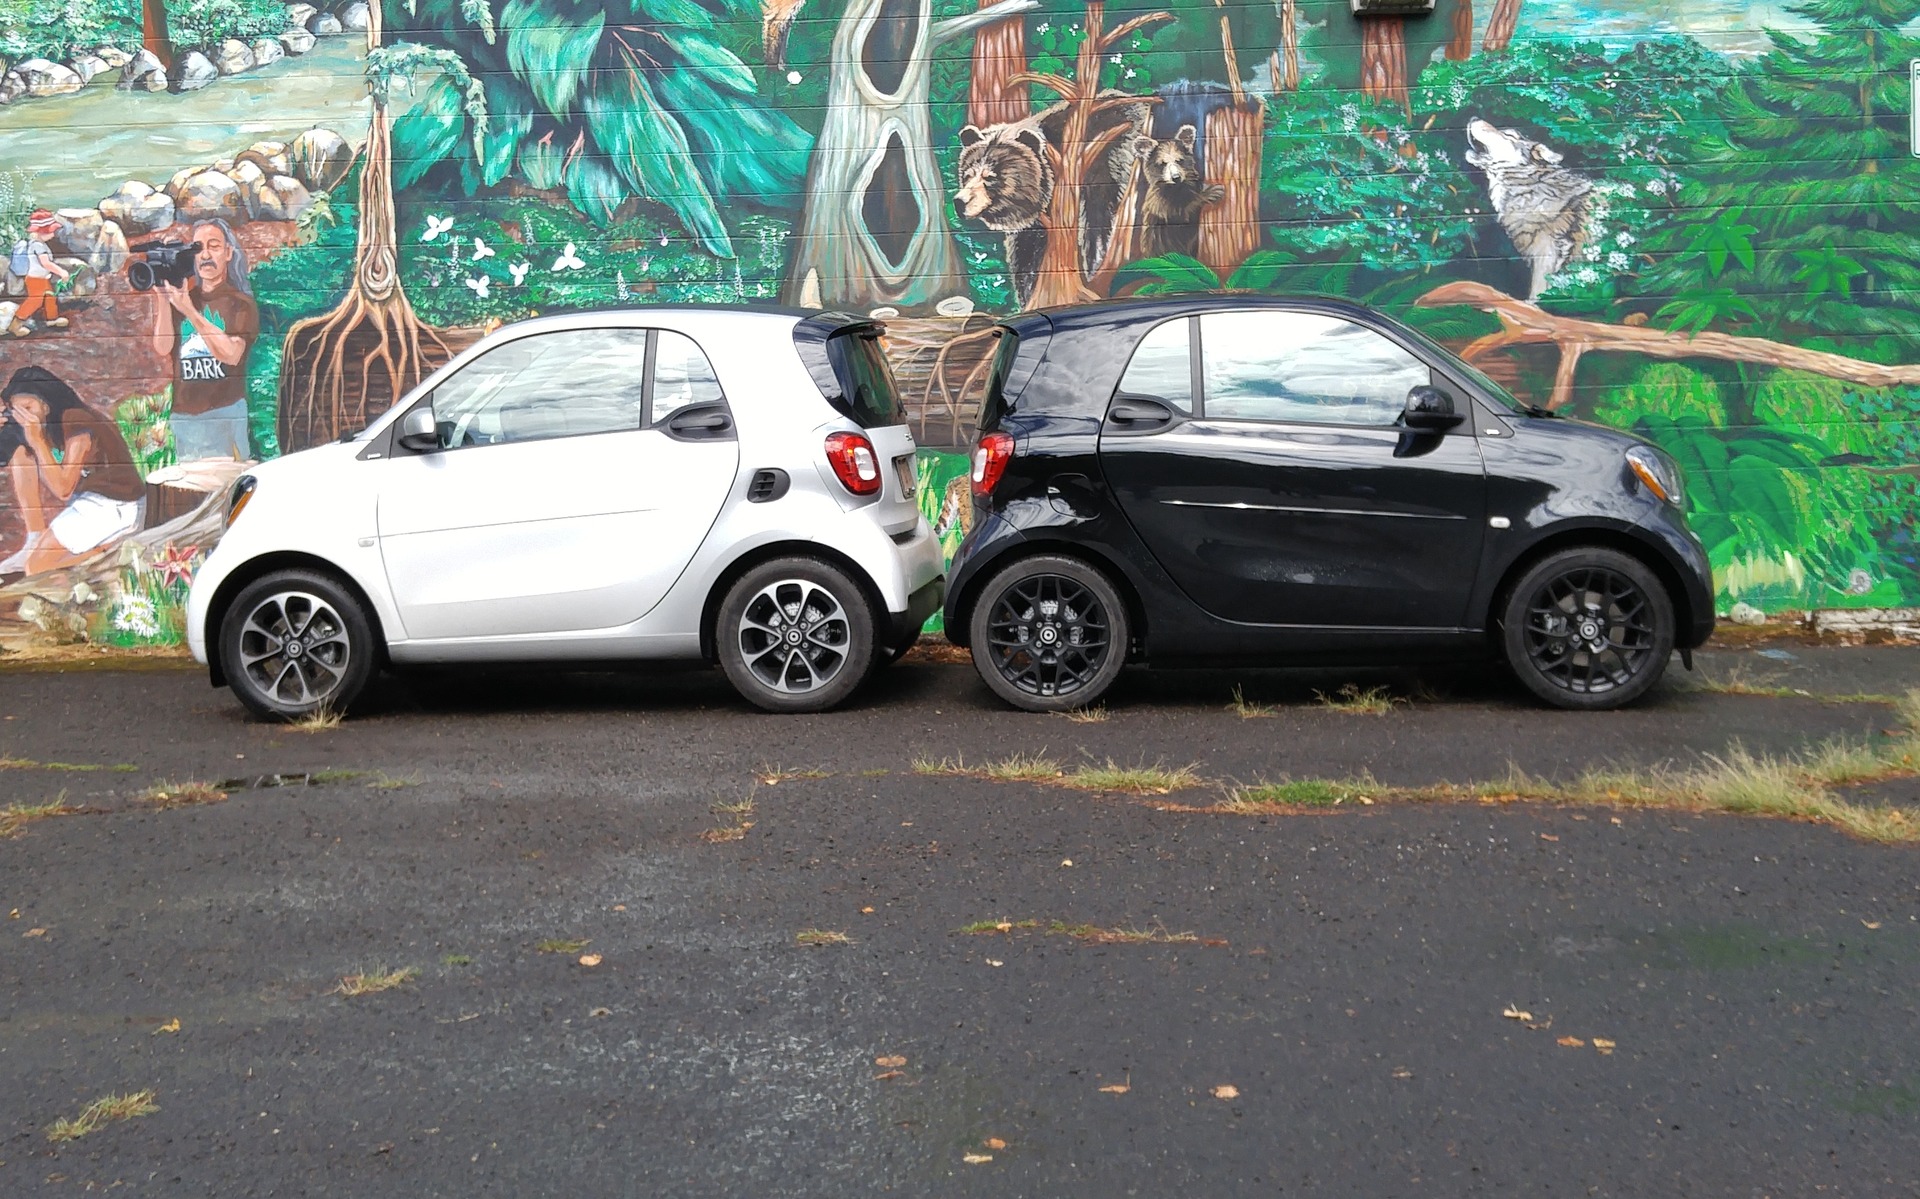 2 x fortwo: Does that make a forfour? Uh, no.